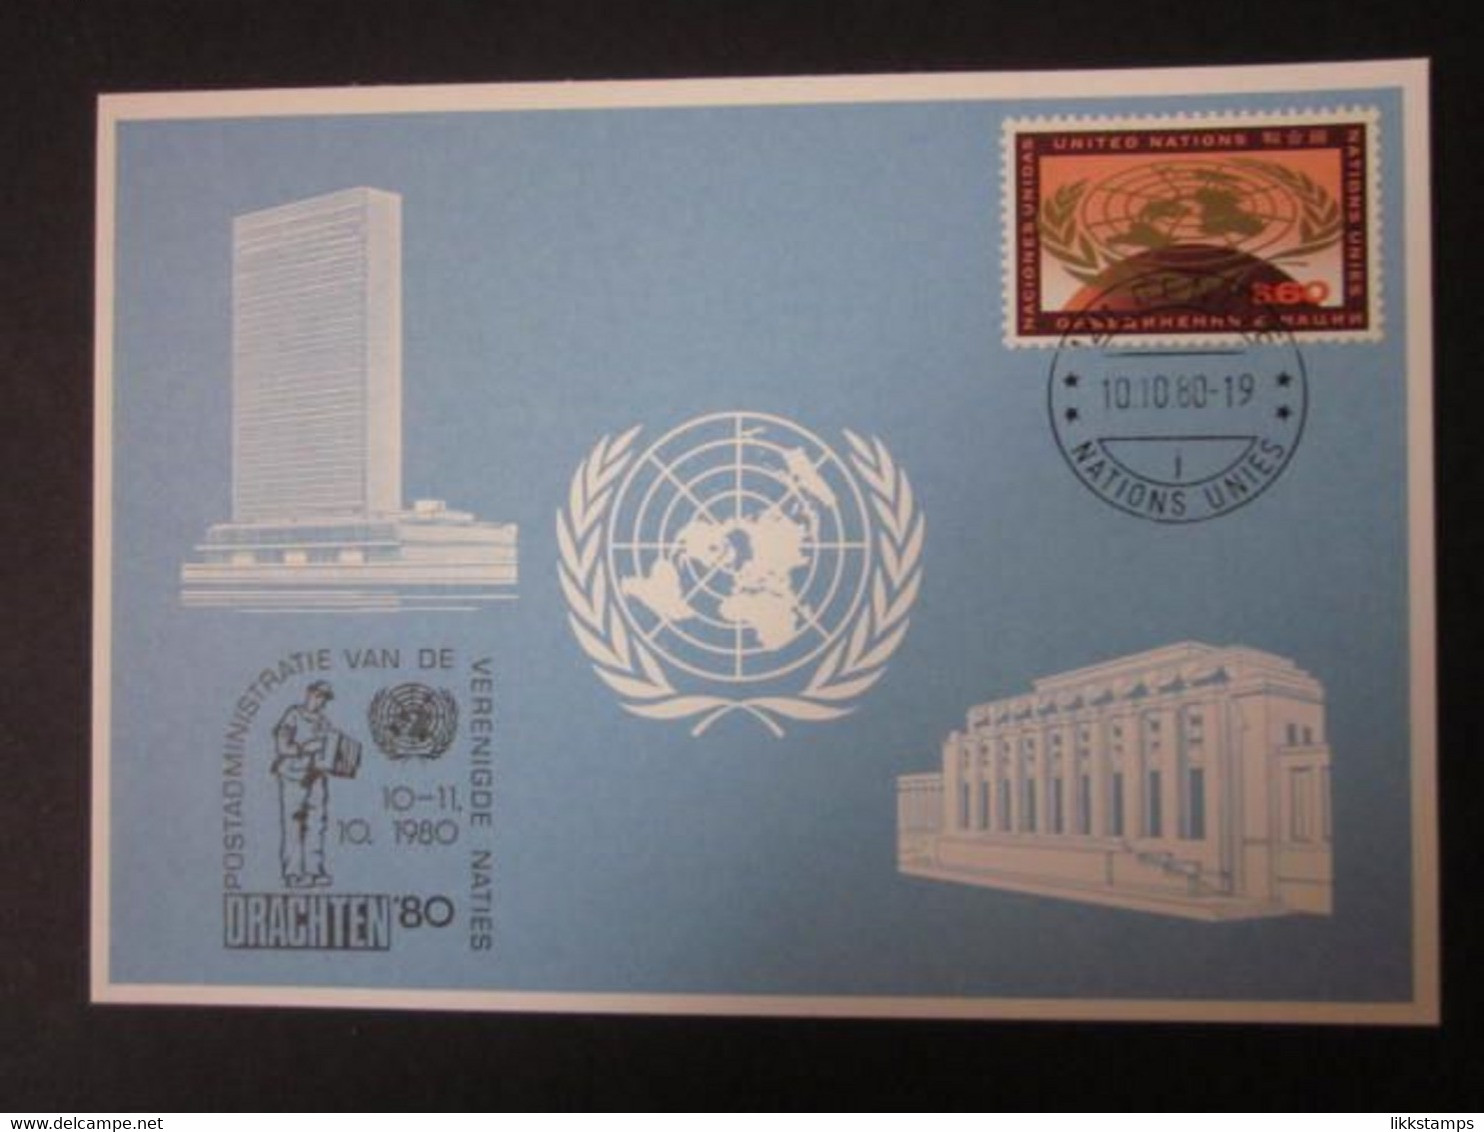 A RARE DRACHTEN '80 STAMP EXHIBITION SOUVENIR CARD WITH FIRST DAY OF EVENT CANCELLATION. ( 02252 ) - Lettres & Documents